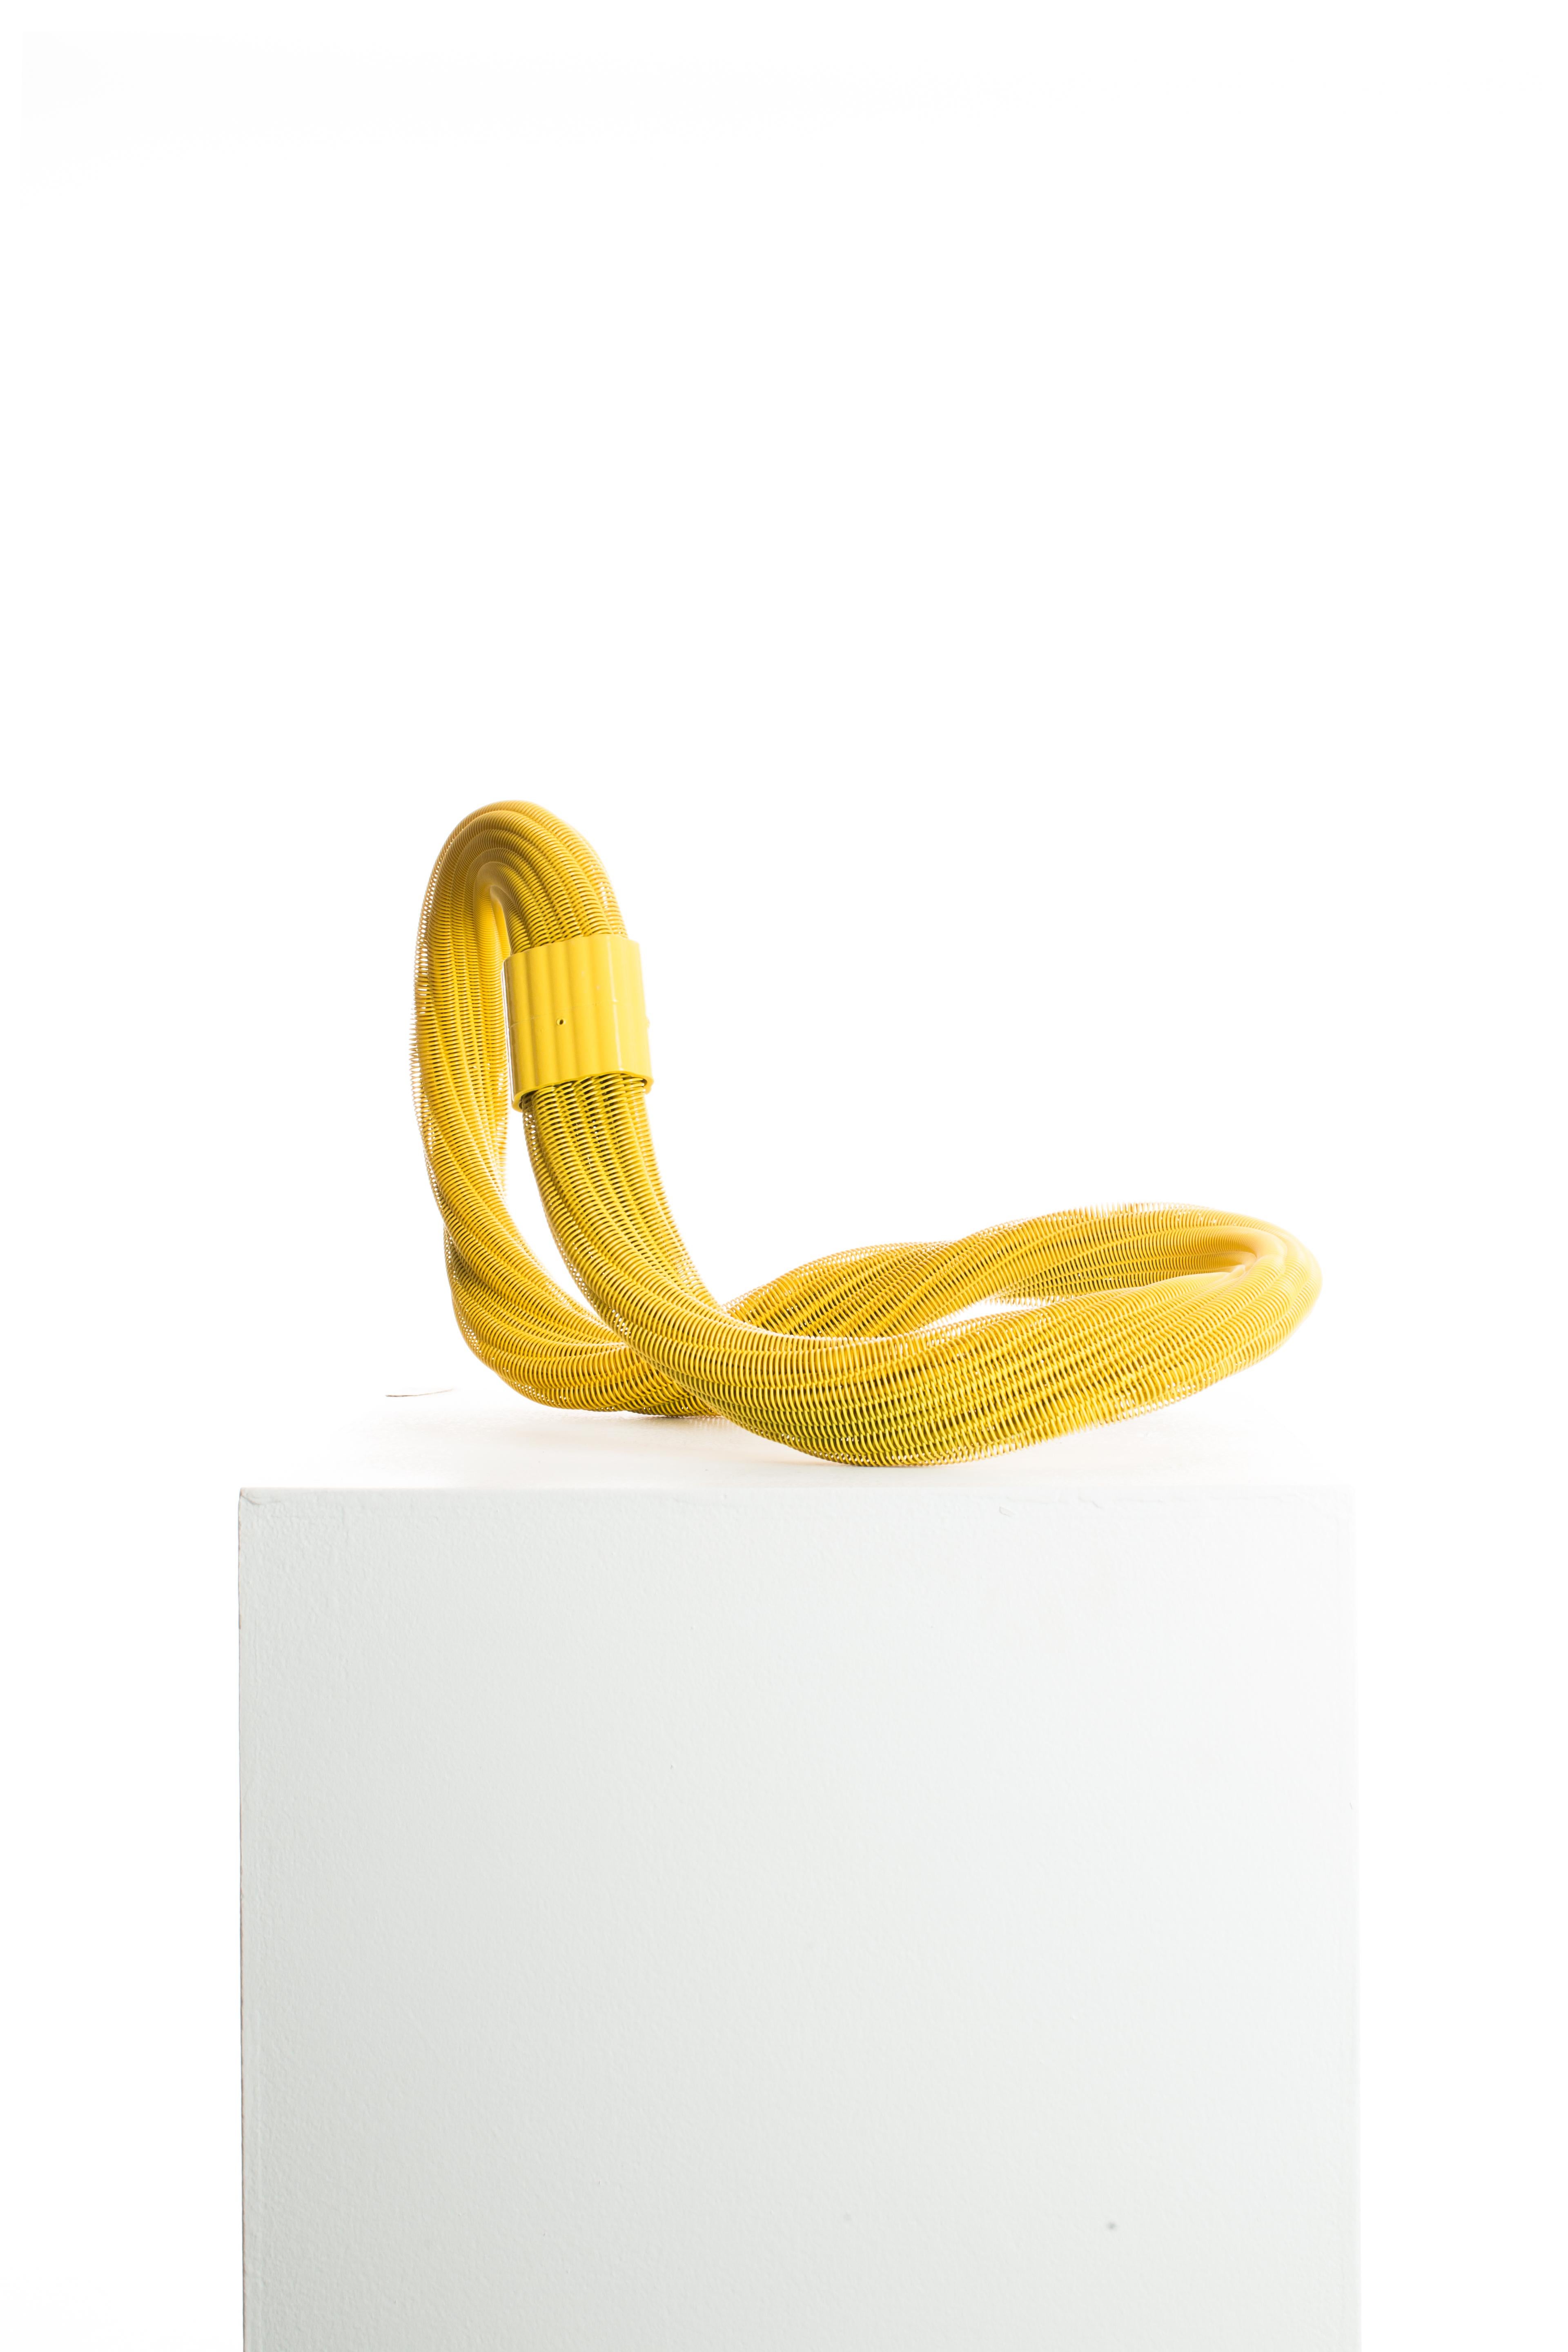 Compact Whisp 002
Yellow
1/1
Spring Steel, Brass, Powder Coating
40cm x 27cm x 32cm
3.2Kg  
2018

Whisps are meticulously constructed organic sculptural expressions. These expressions are symbolic of what the mind feels like to artist Driaan